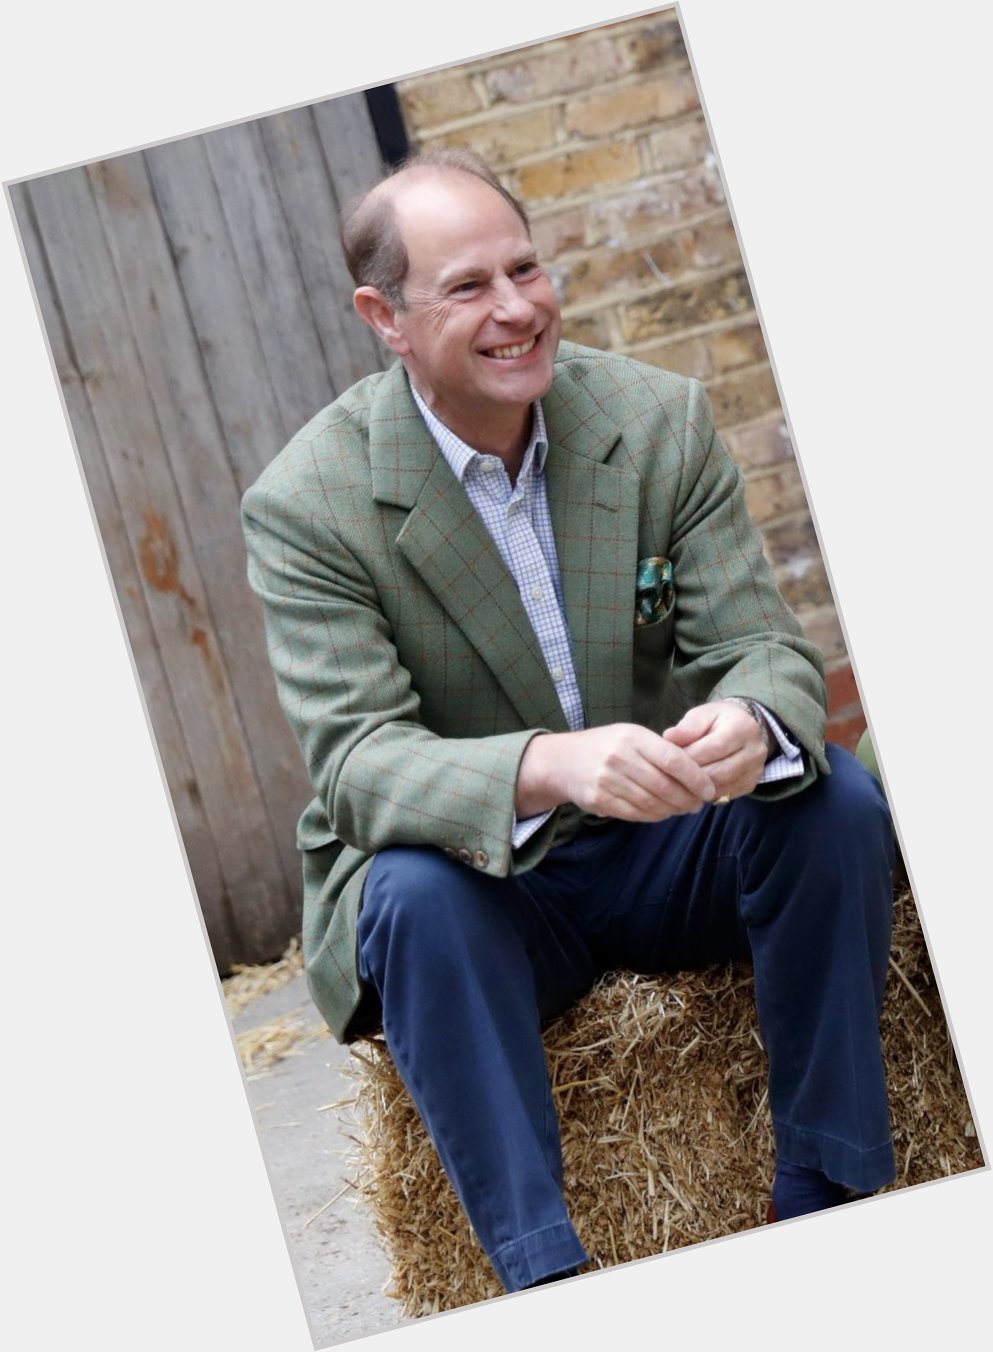 Wishing a very happy Birthday to our Amazing Prince Edward, who turns 57 today!      